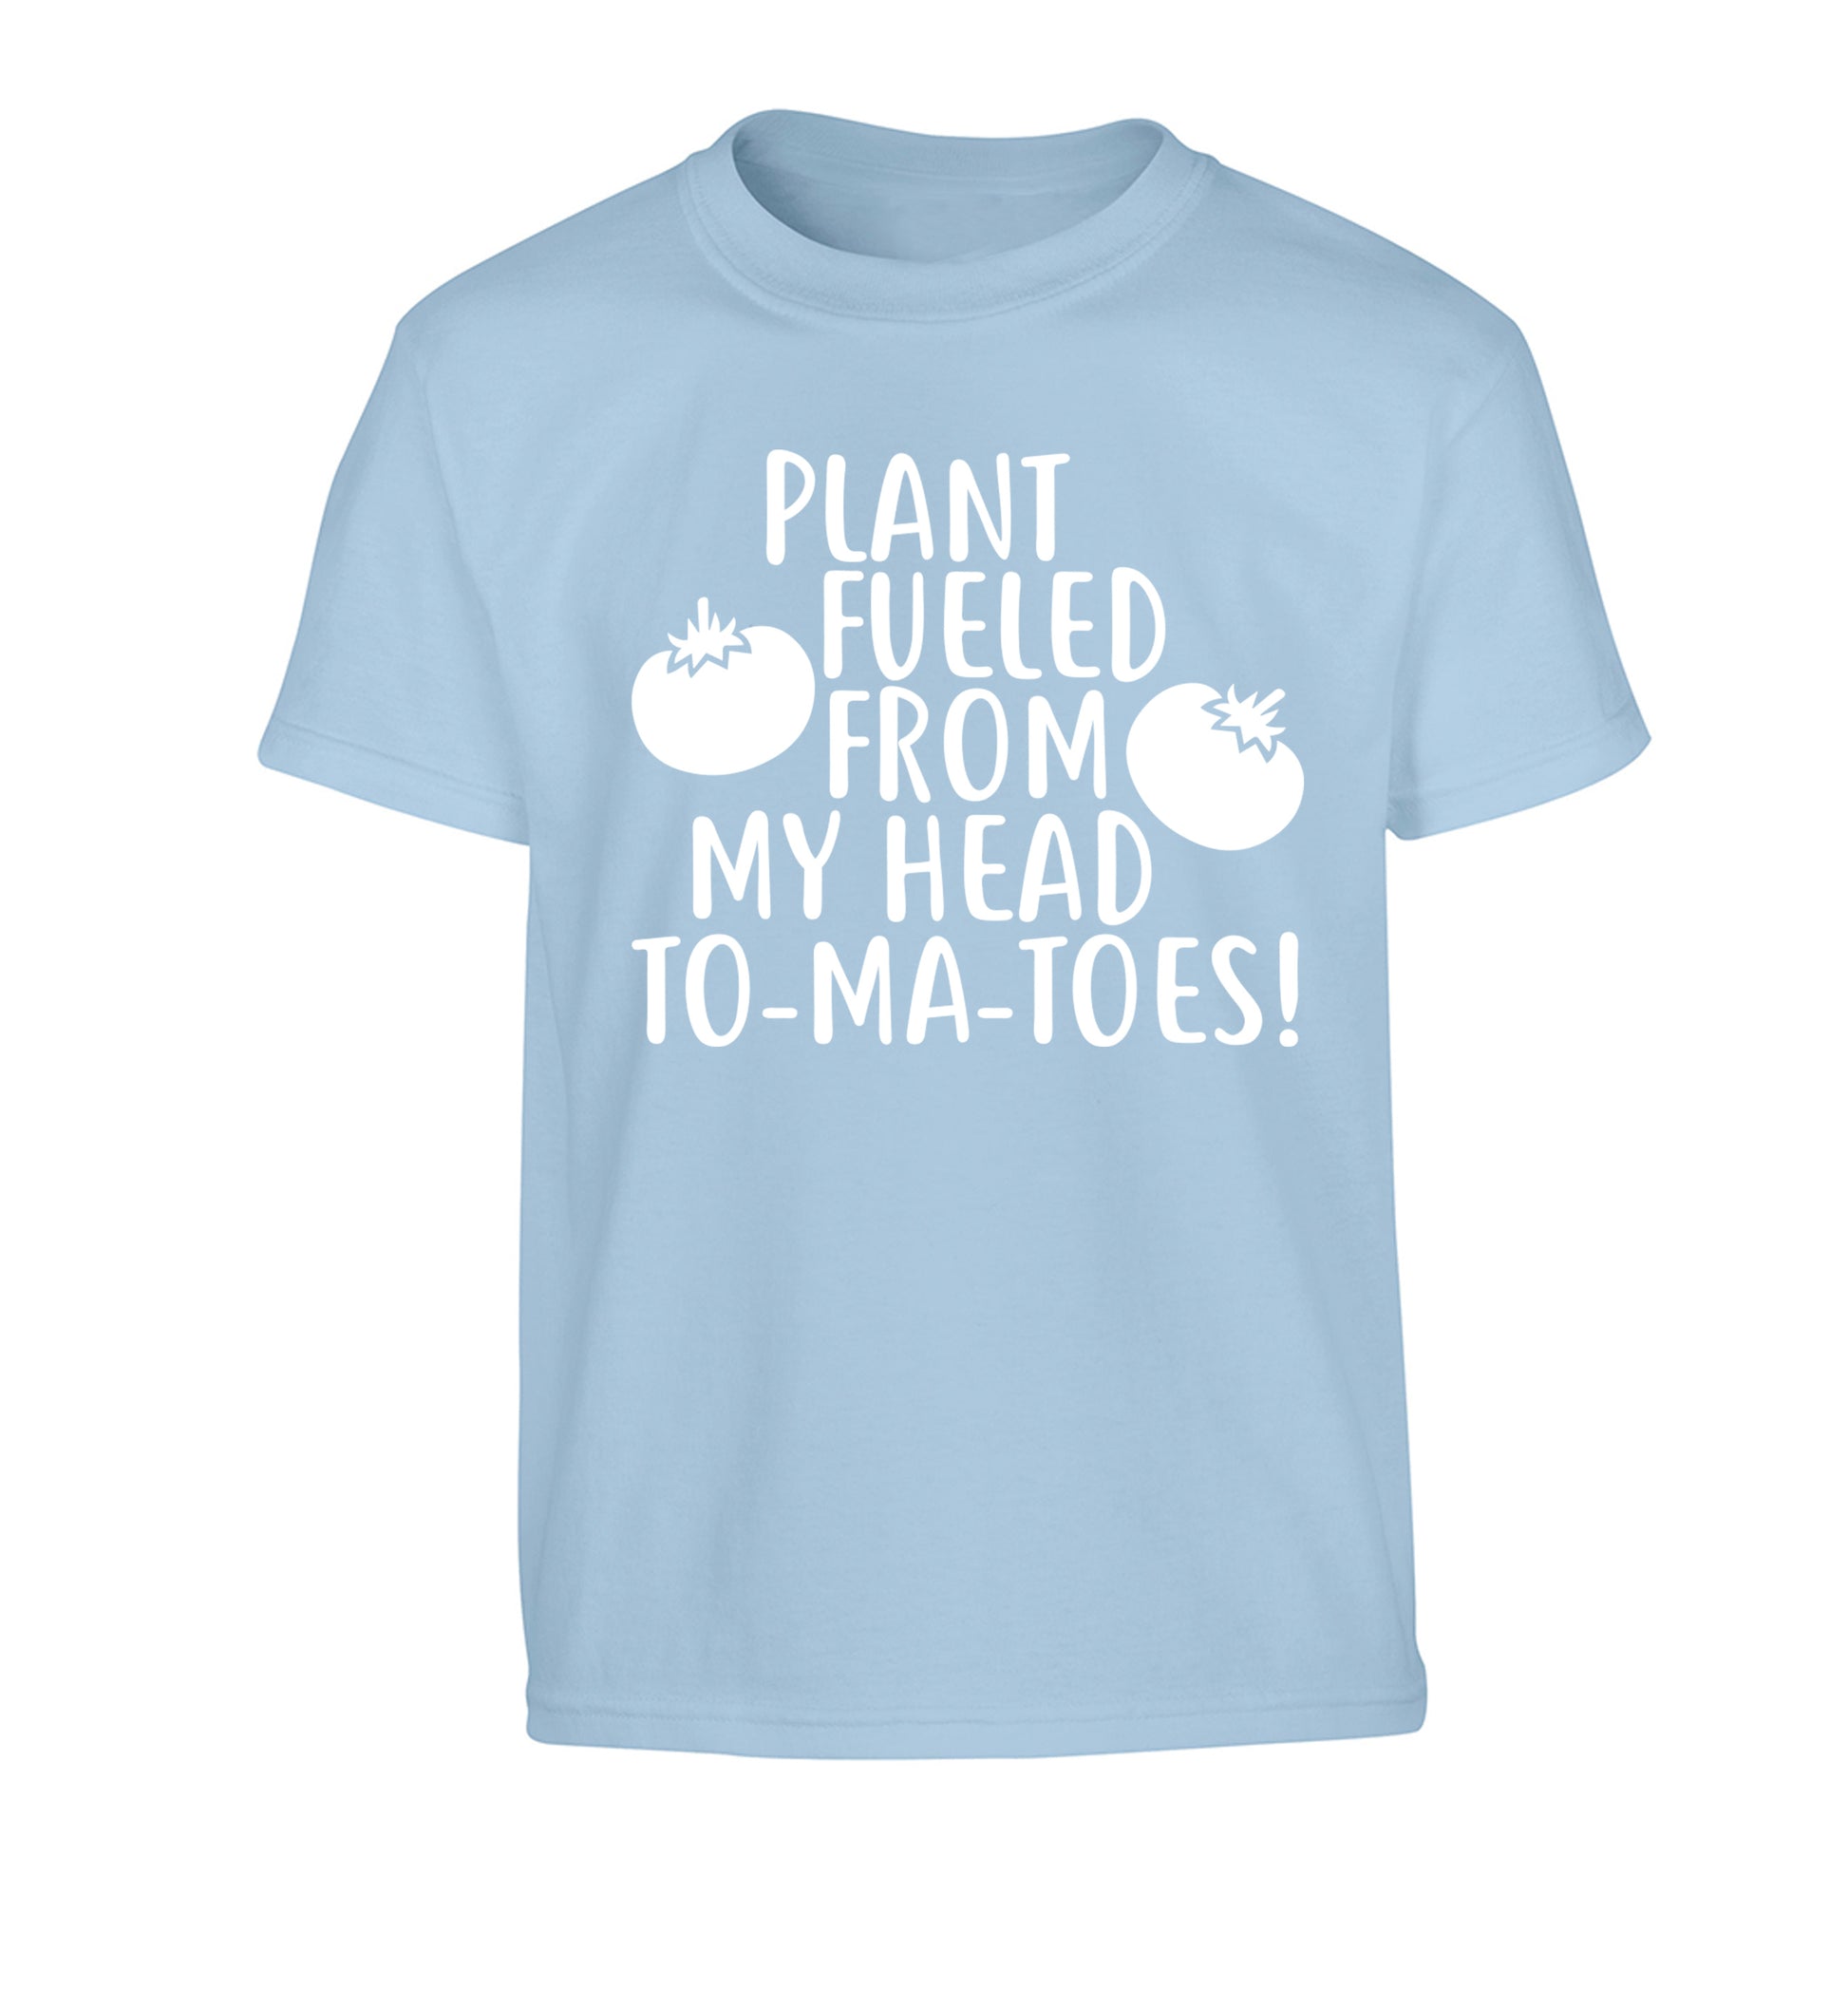 Plant fueled from my head to-ma-toes Children's light blue Tshirt 12-14 Years